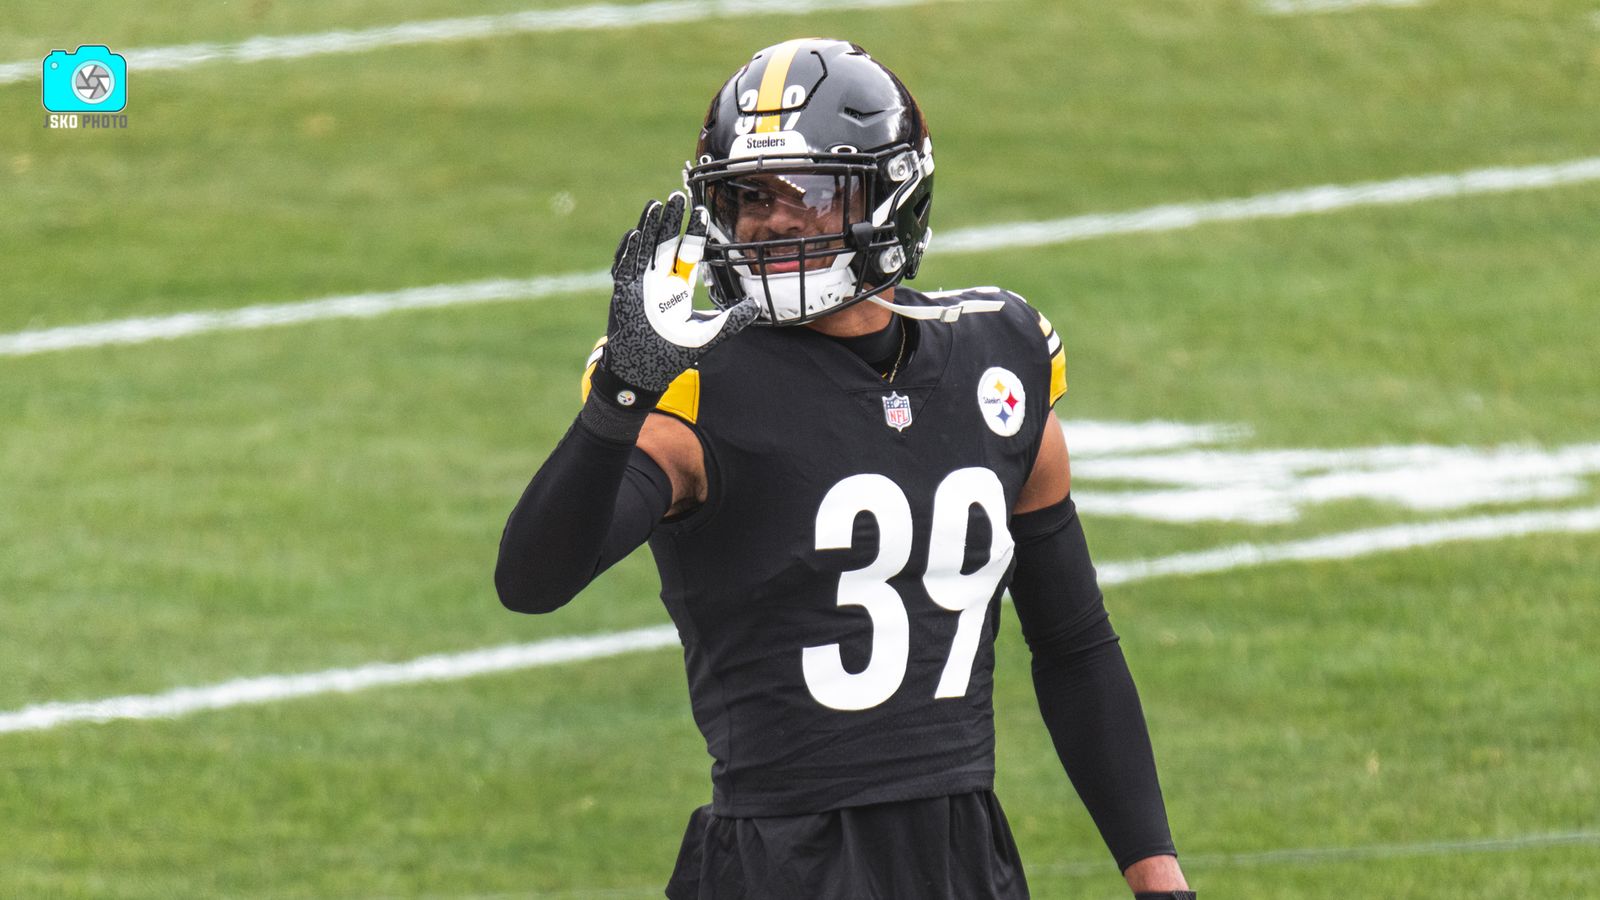 Minkah Fitzpatrick does it all for the Steelers in his 'statement